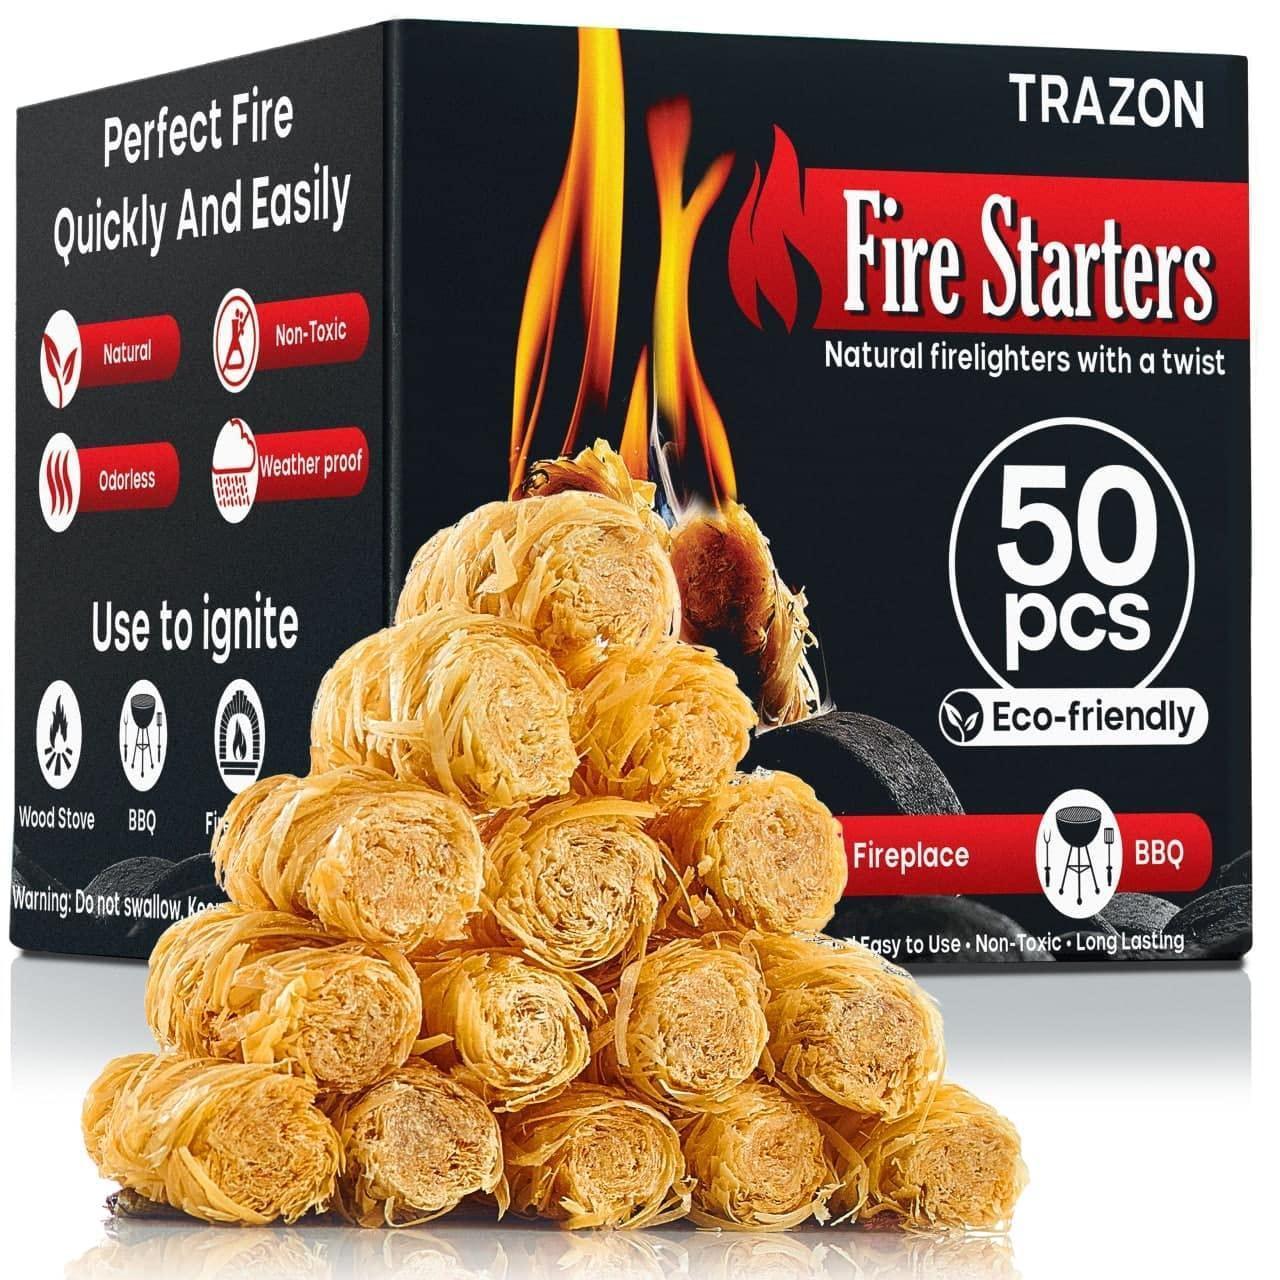 Fire Starters for Indoor Fireplace Campfires Wood Stove Grill Charcoal Chimney Fire Pit BBQ Accessor